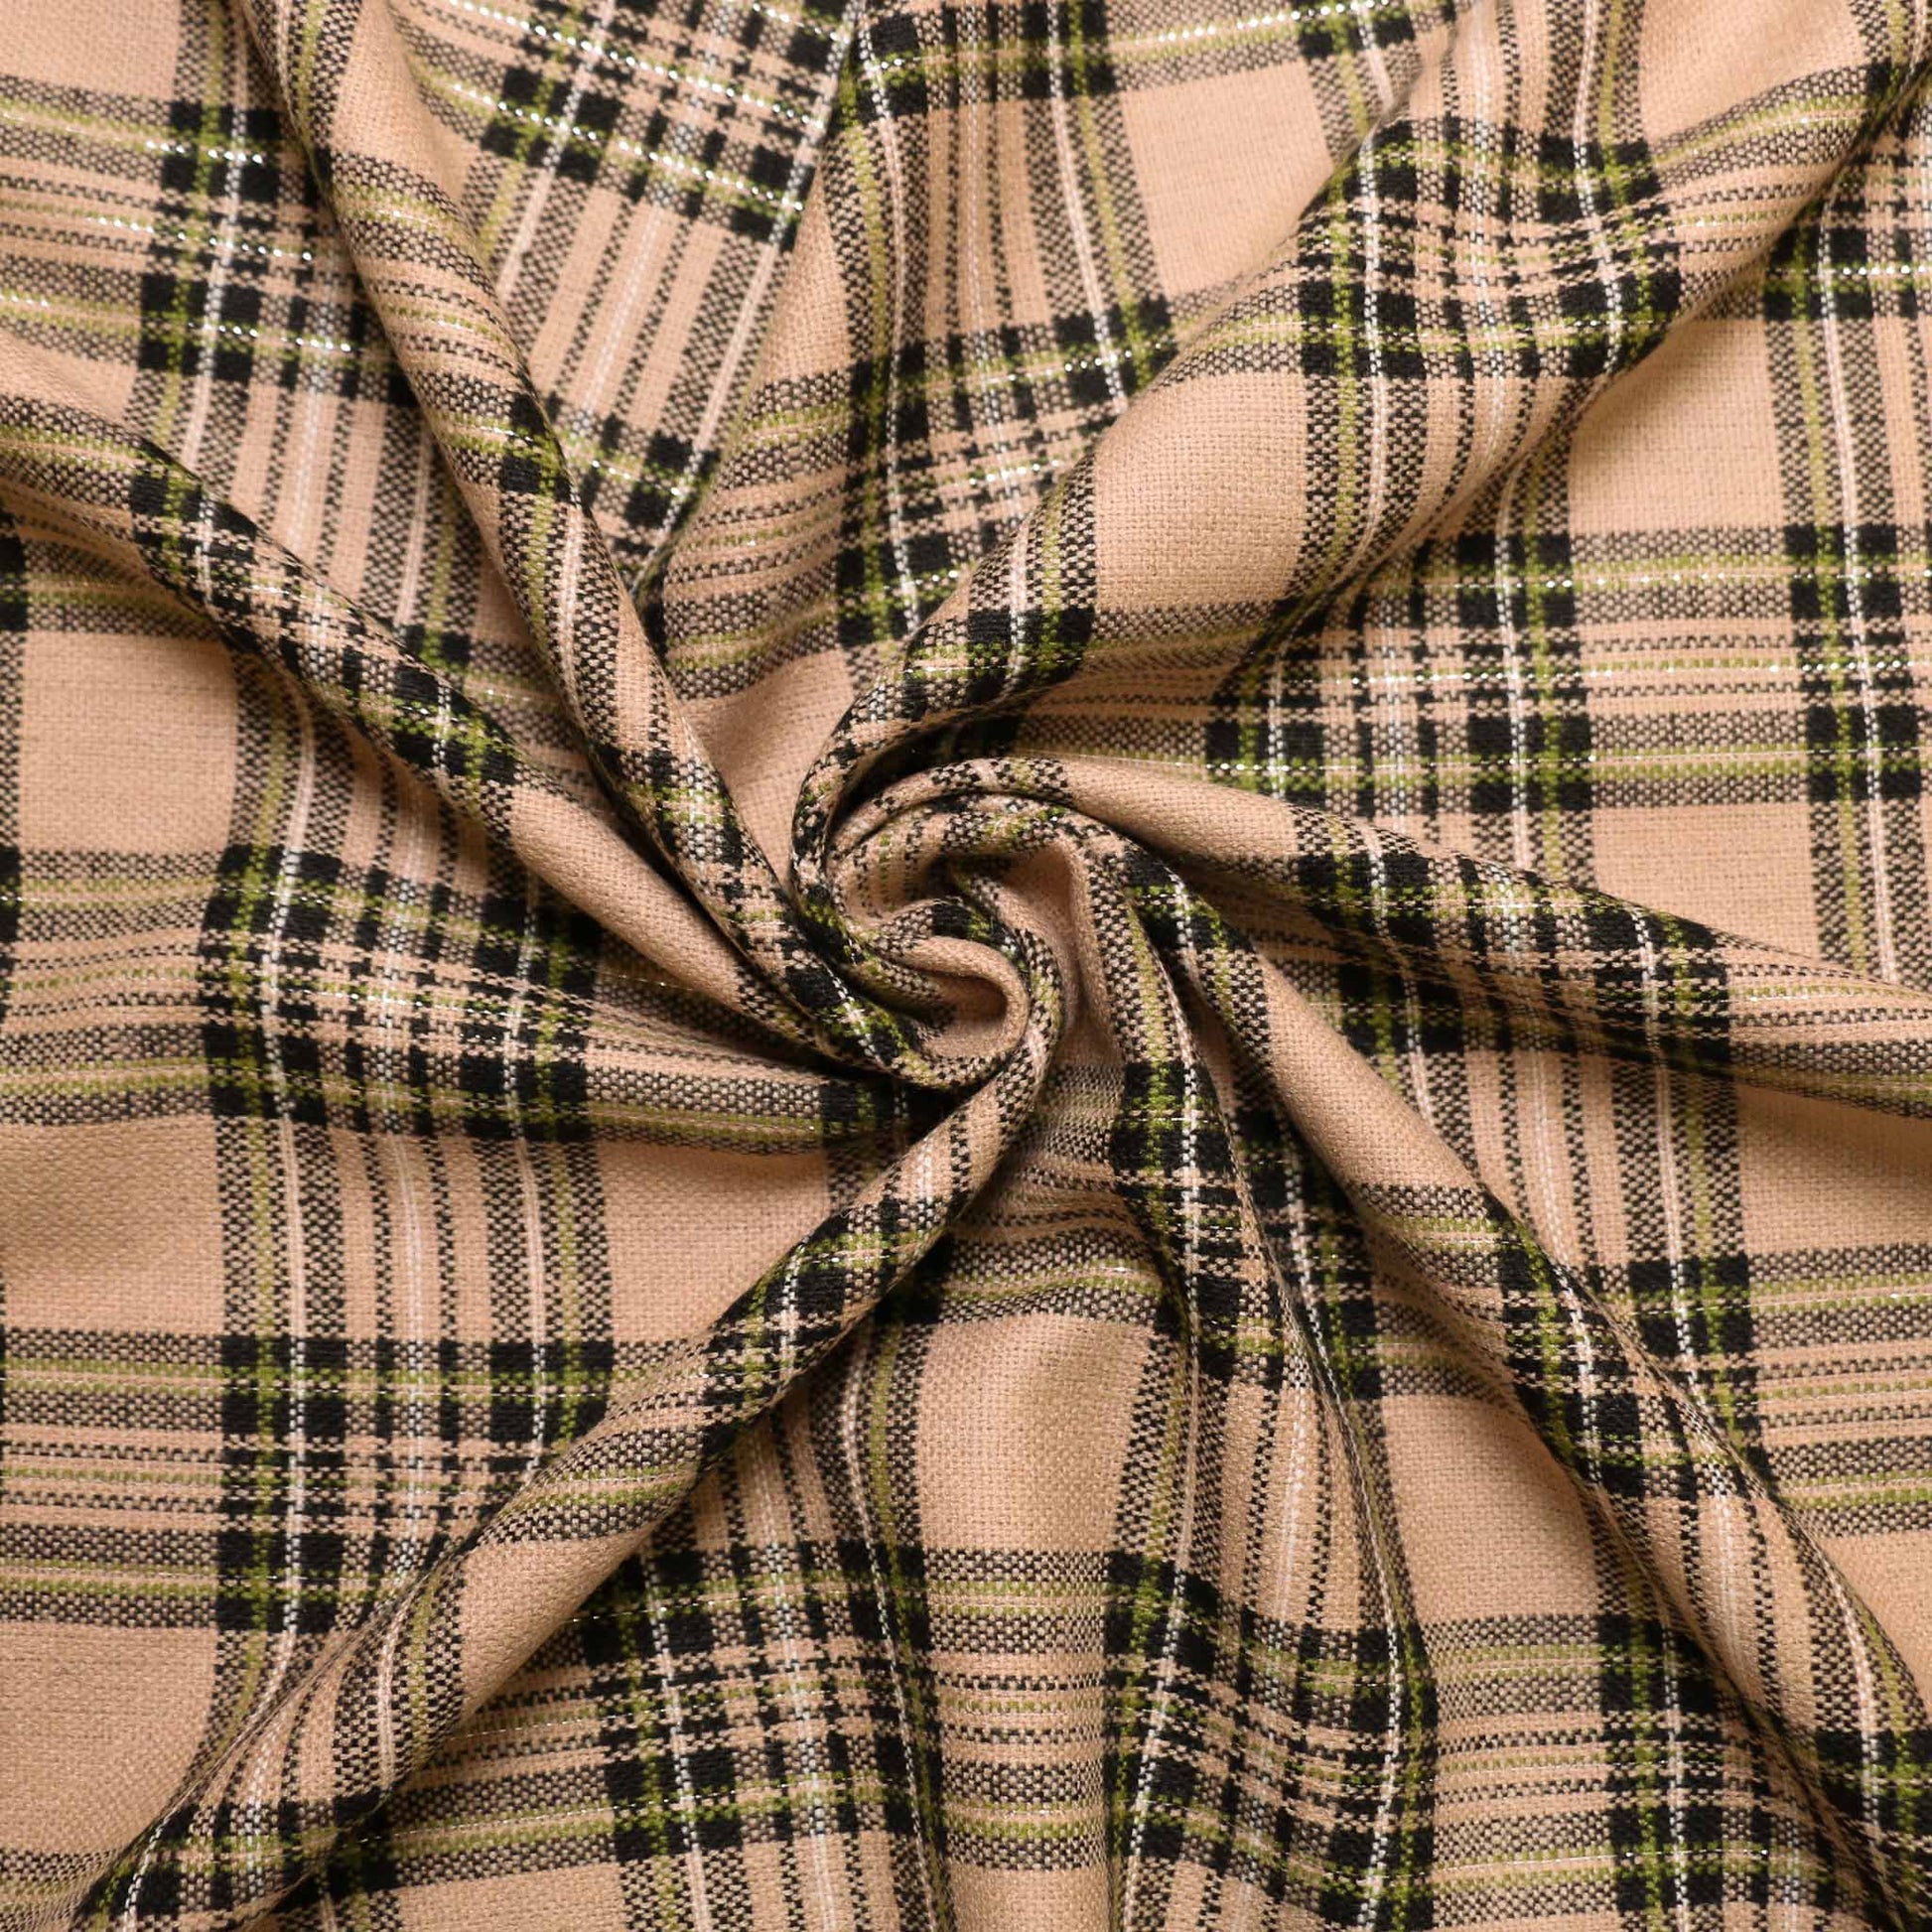 wool voltaire fabric in beige with black and khaki check pattern